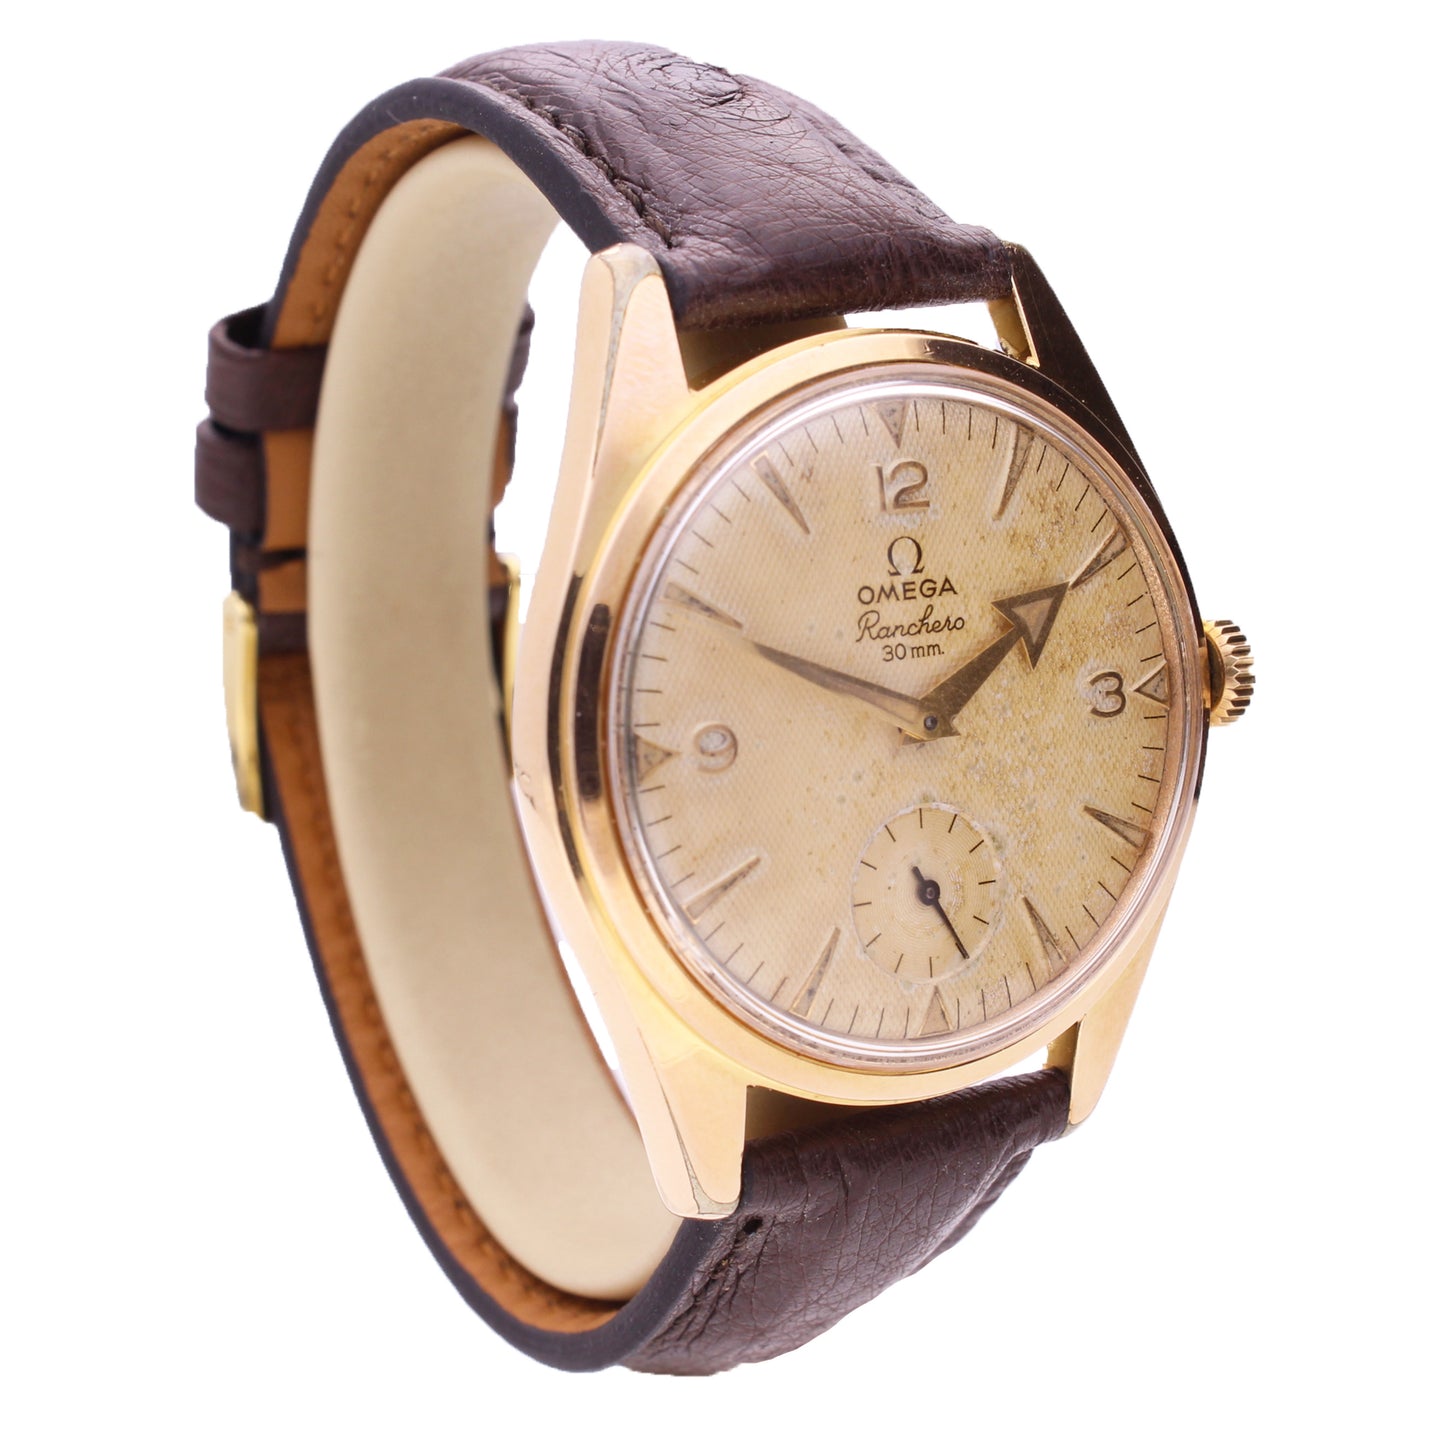 Gold plated OMEGA Ranchero wristwatch. Made 1958